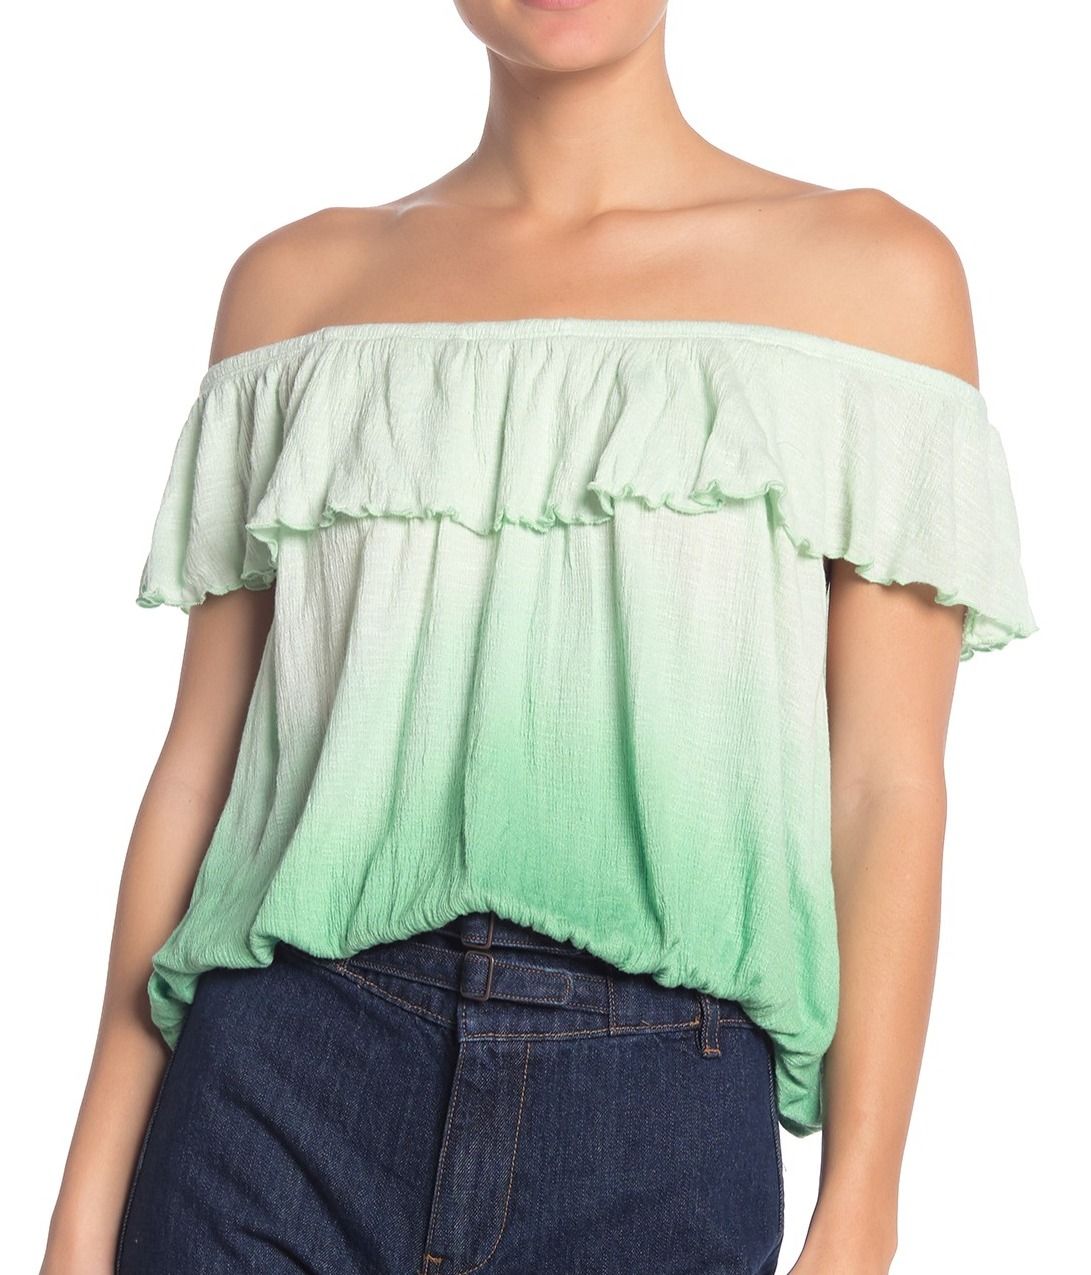 Color: Greens Size Type: Regular Size (Women's): L Sleeve Length: Short Sleeve Type: Blouse Style: Blouse Neckline: Off the Shoulder Pattern: Solid Theme: Colorful Material: Rayon